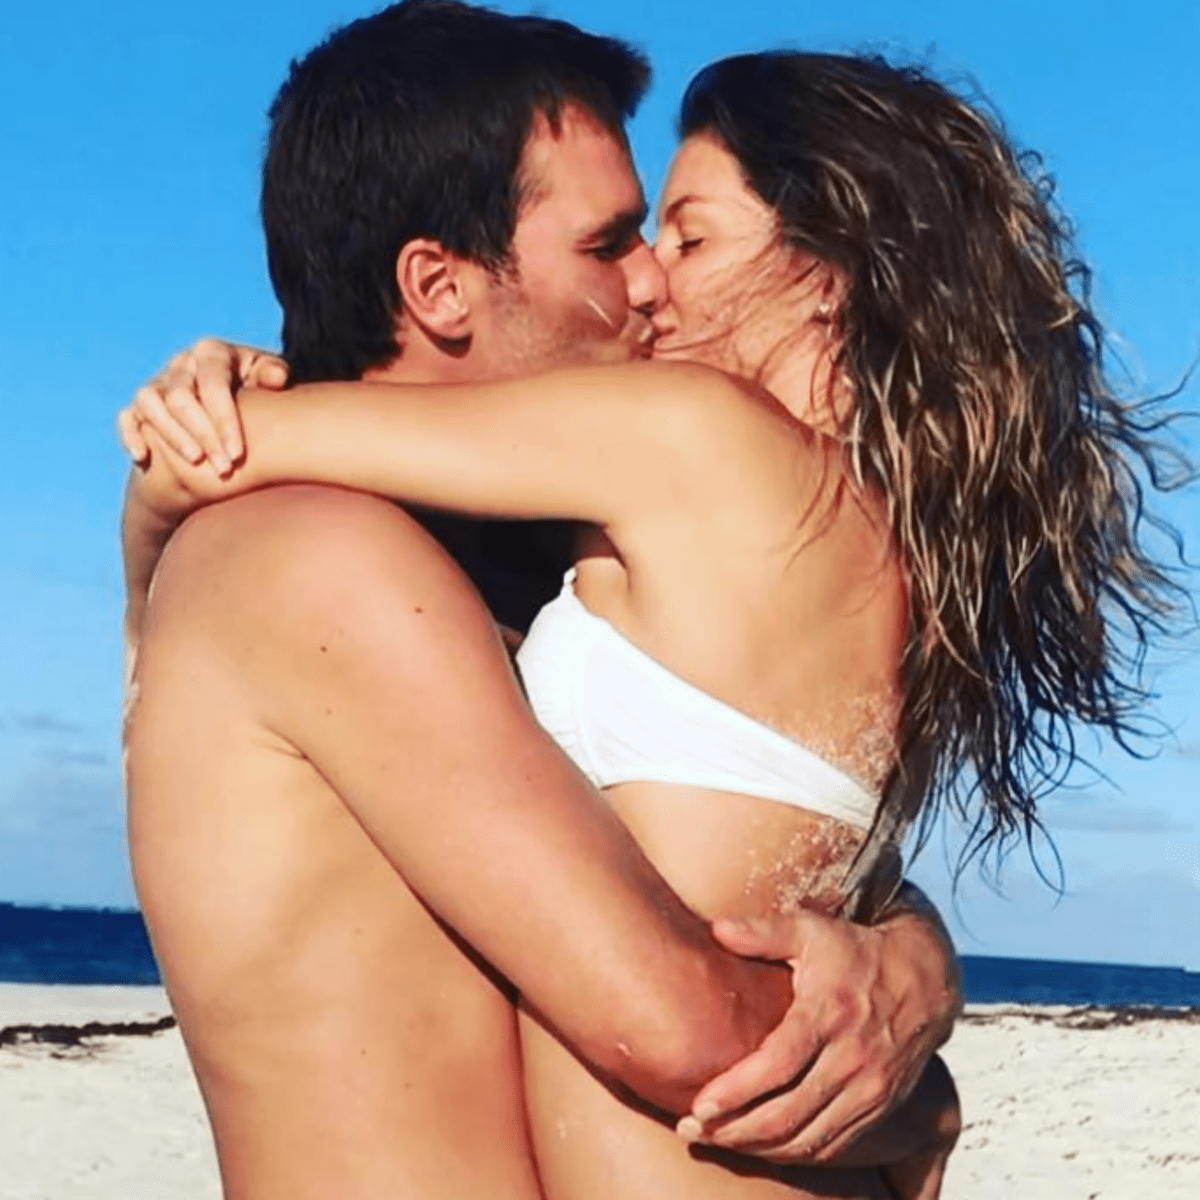 A Shirtless Photo Of Tom Brady And Gisele Is Going Viral - The Spun: What's  Trending In The Sports World Today